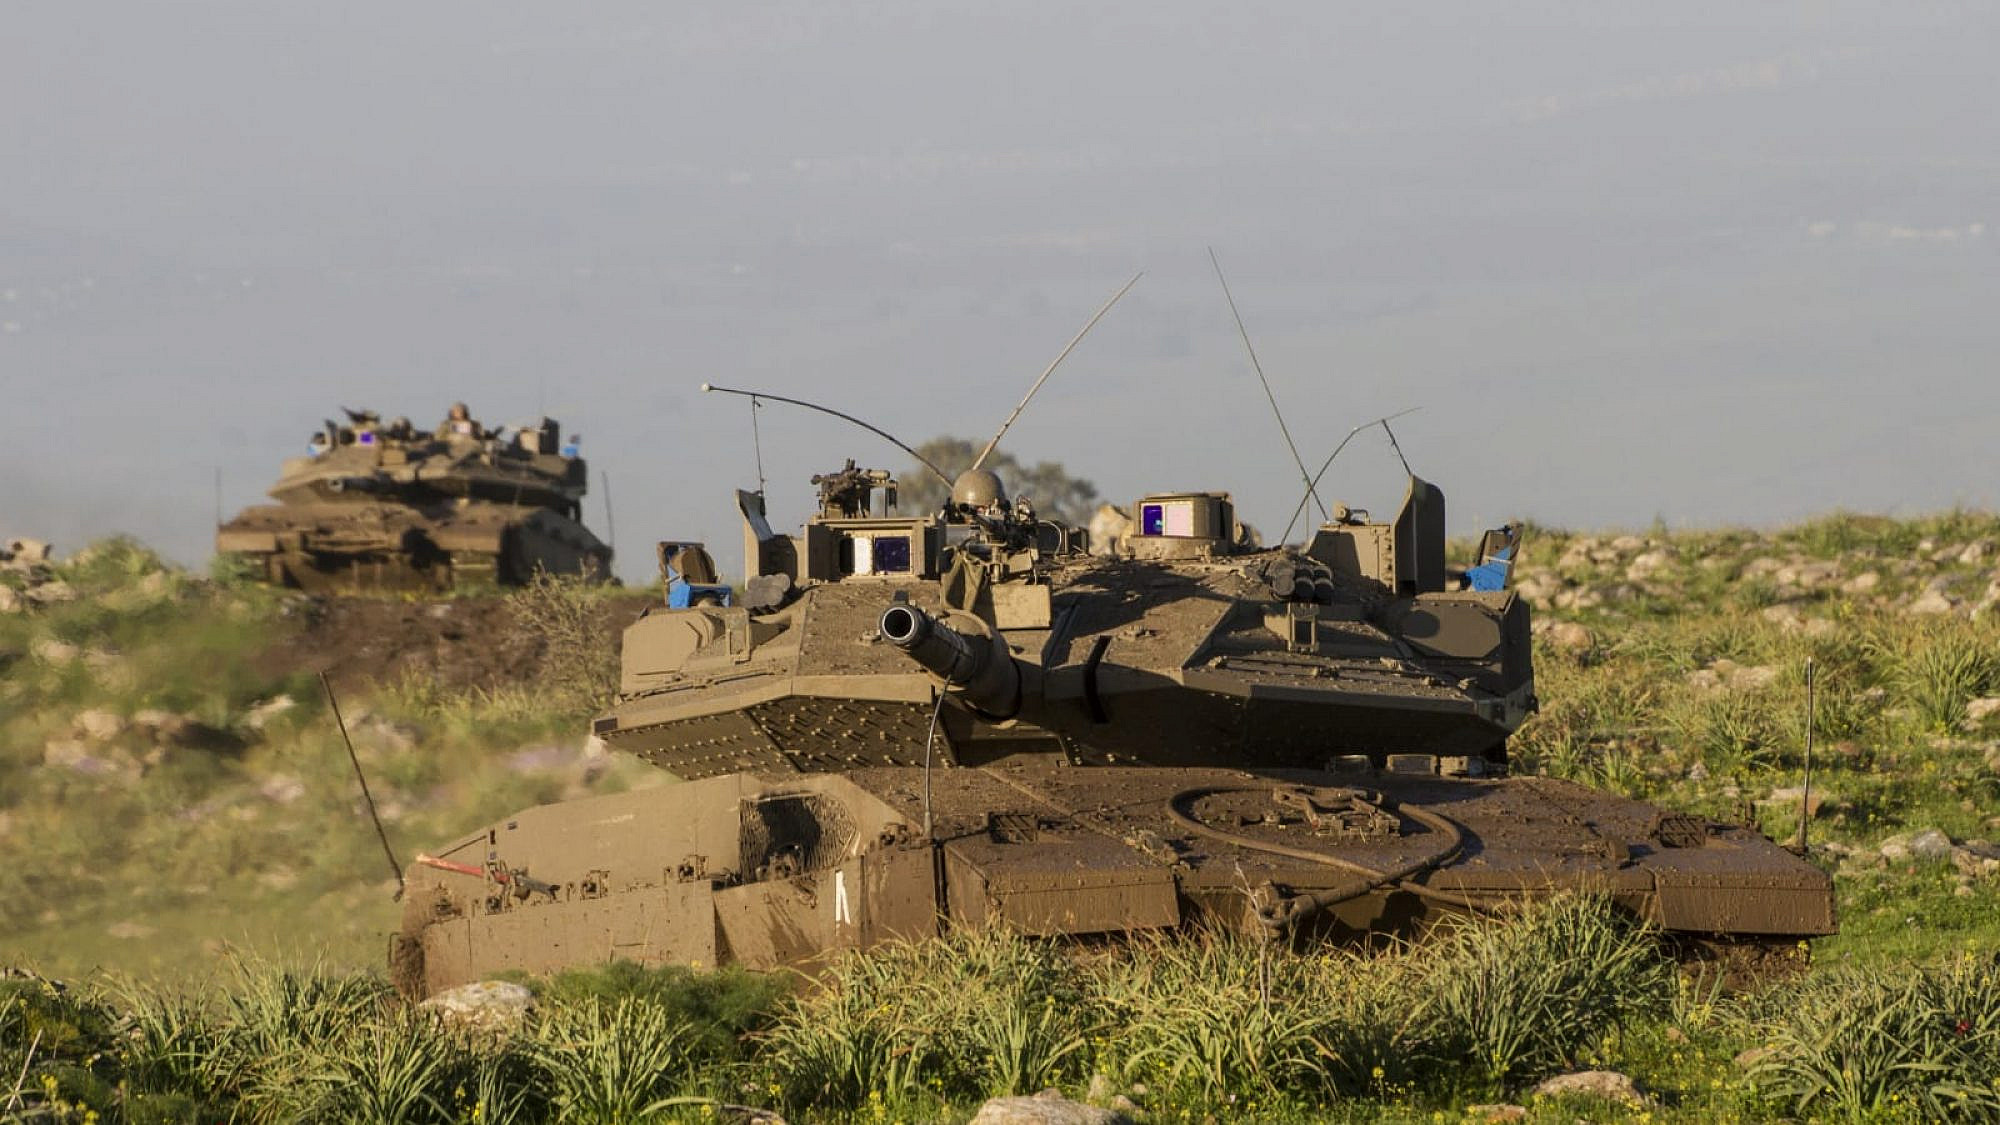 ‘We’re supposed to be dead’: Israeli tank protection system has transformed land warfare